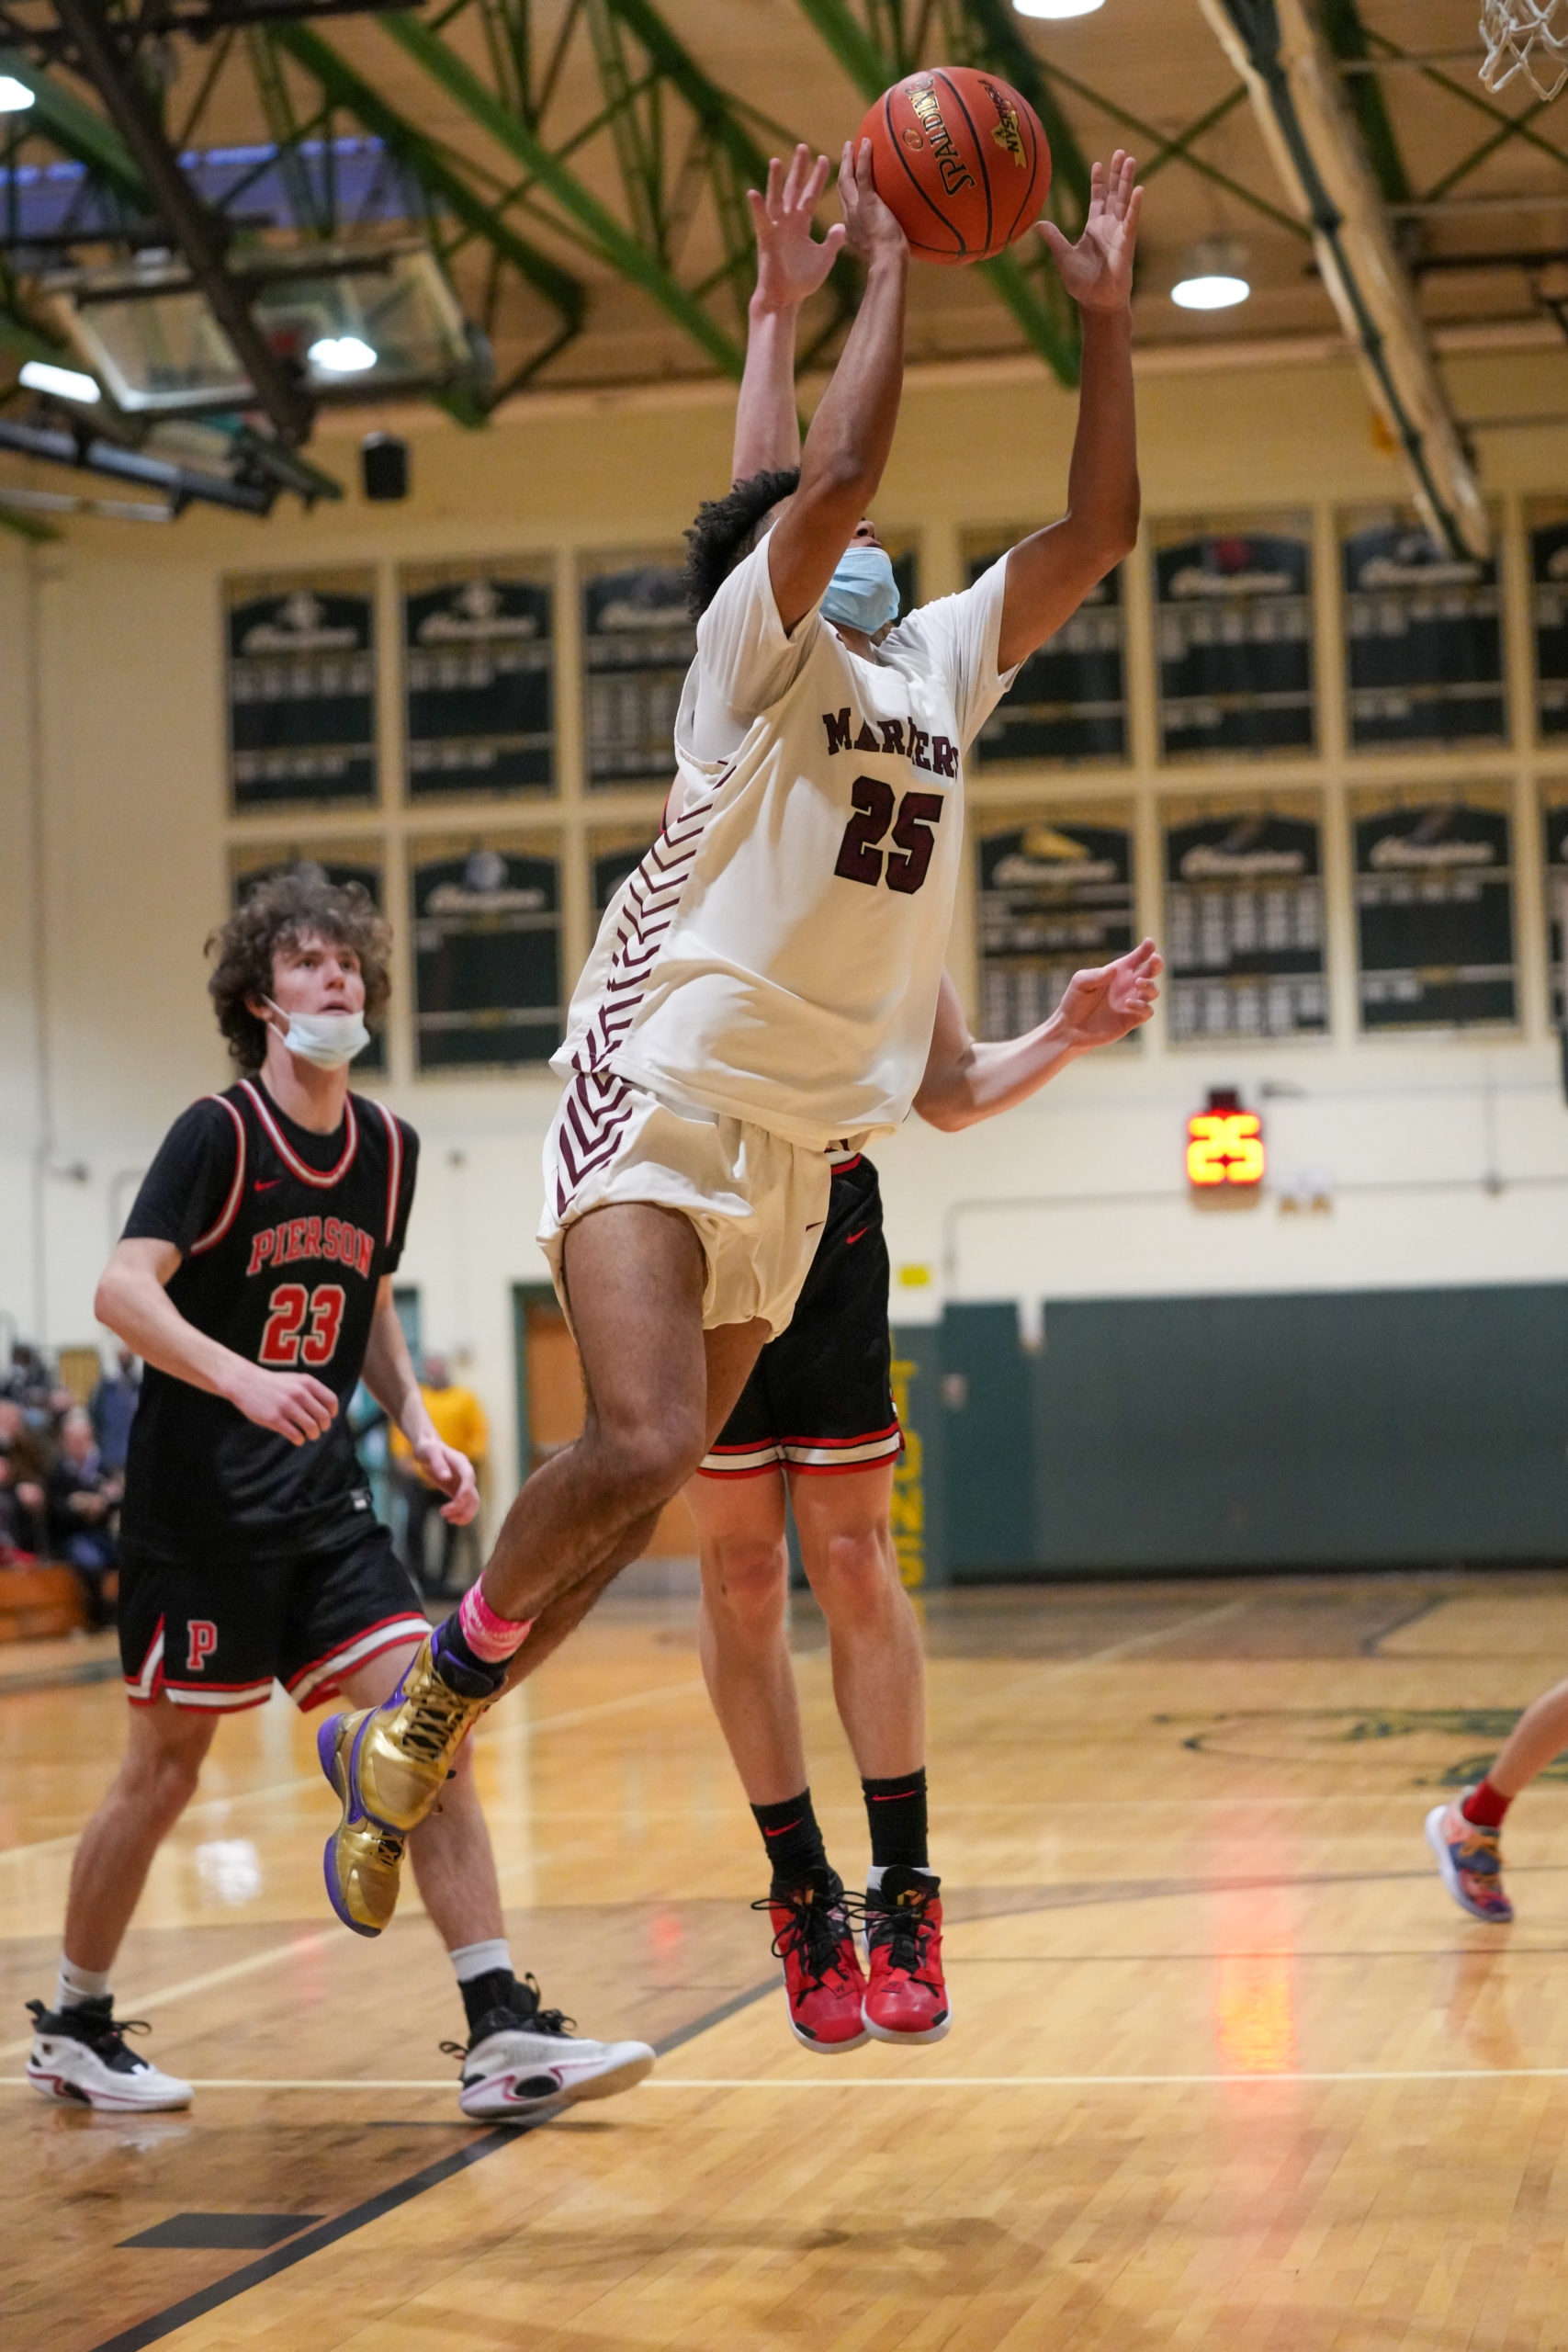 LeBron Napier scored 23 points and helped lead Southampton to a 87-54 victory over Pierson on Tuesday. RON ESPOSITO